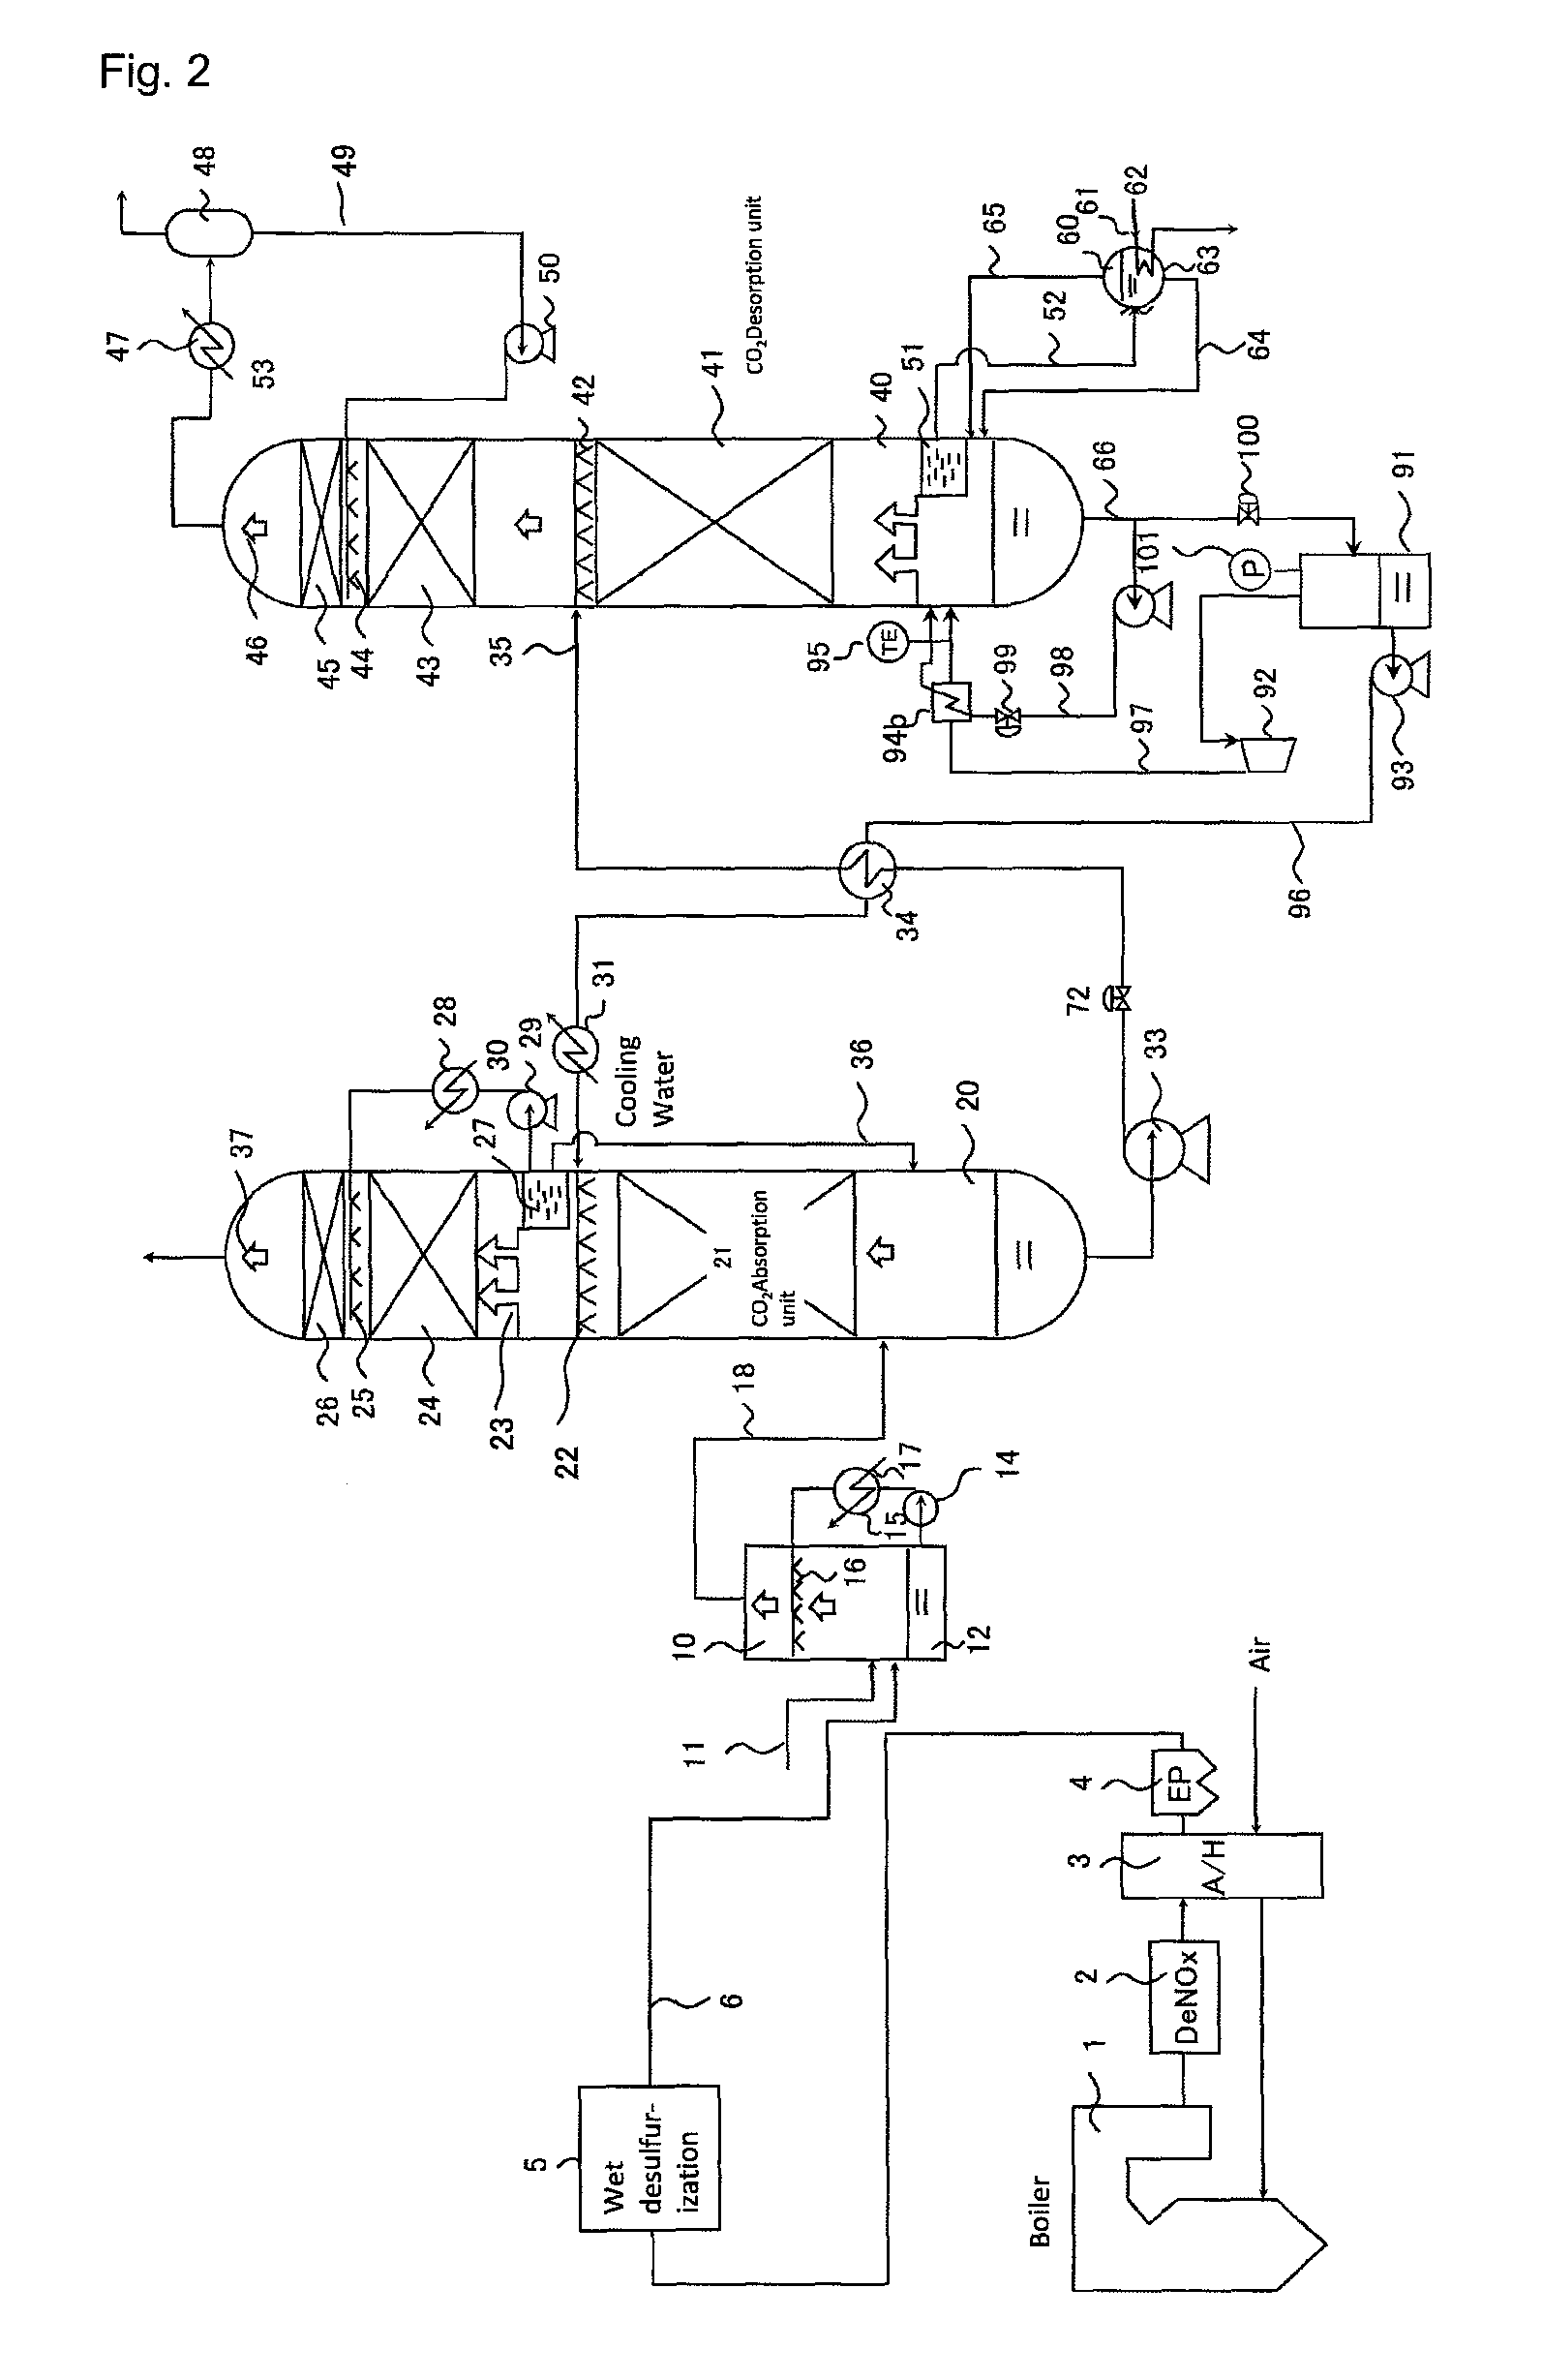 Carbon dioxide chemical absorption system installed with vapor recompression equipment